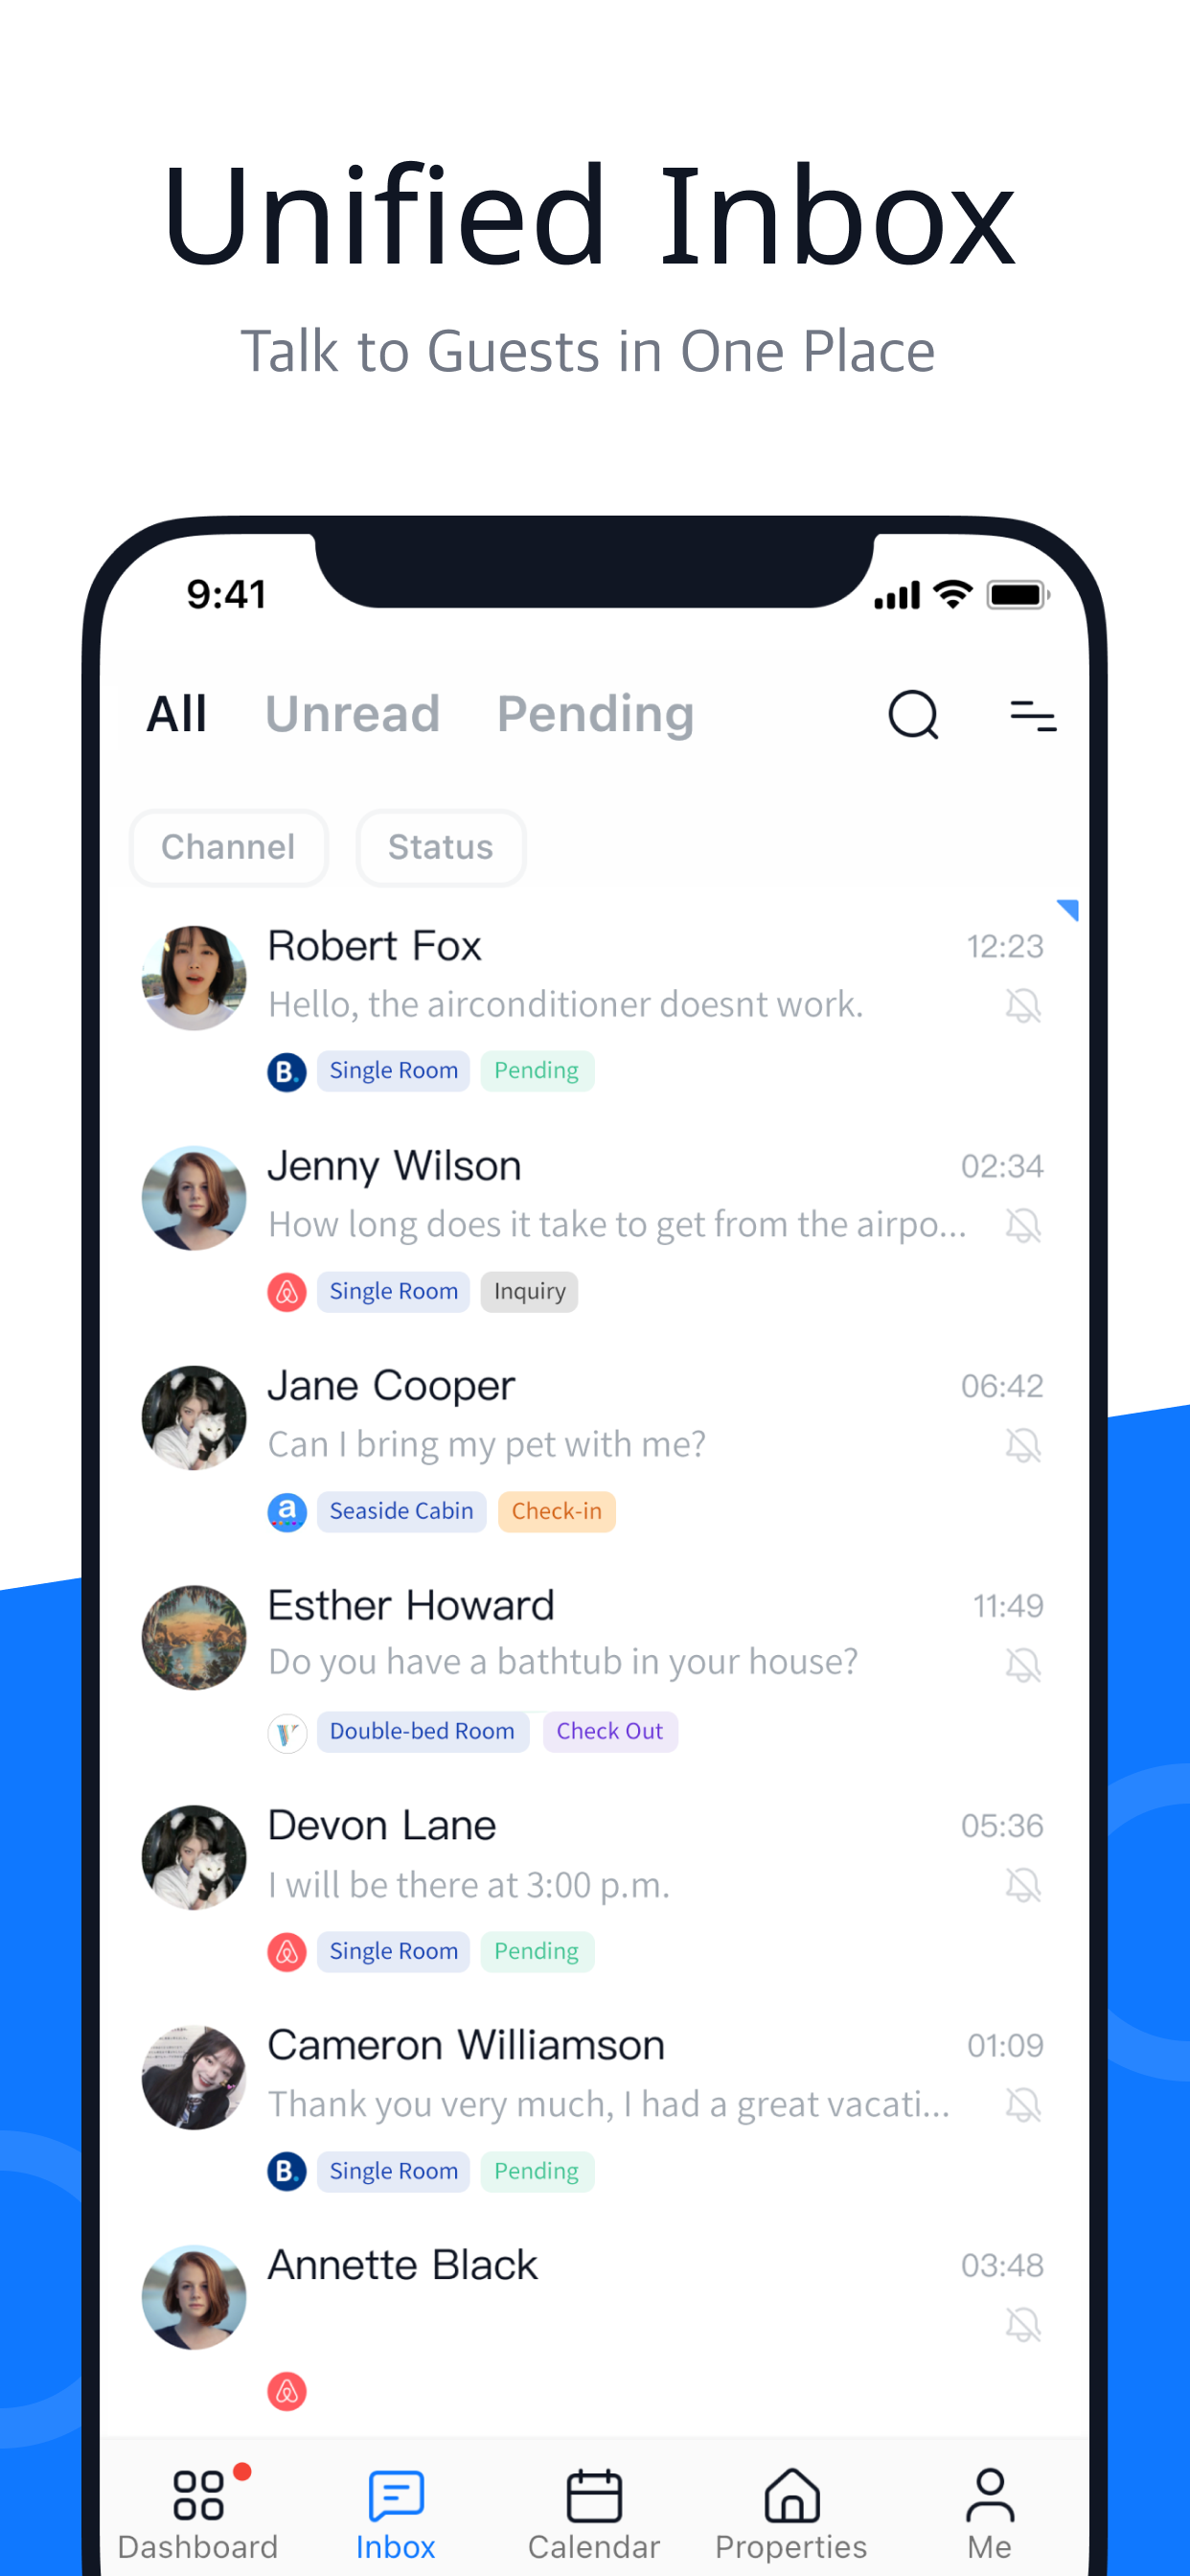 Hostex syncs the messages, and reviews from all your booking channels in an unified inbox.